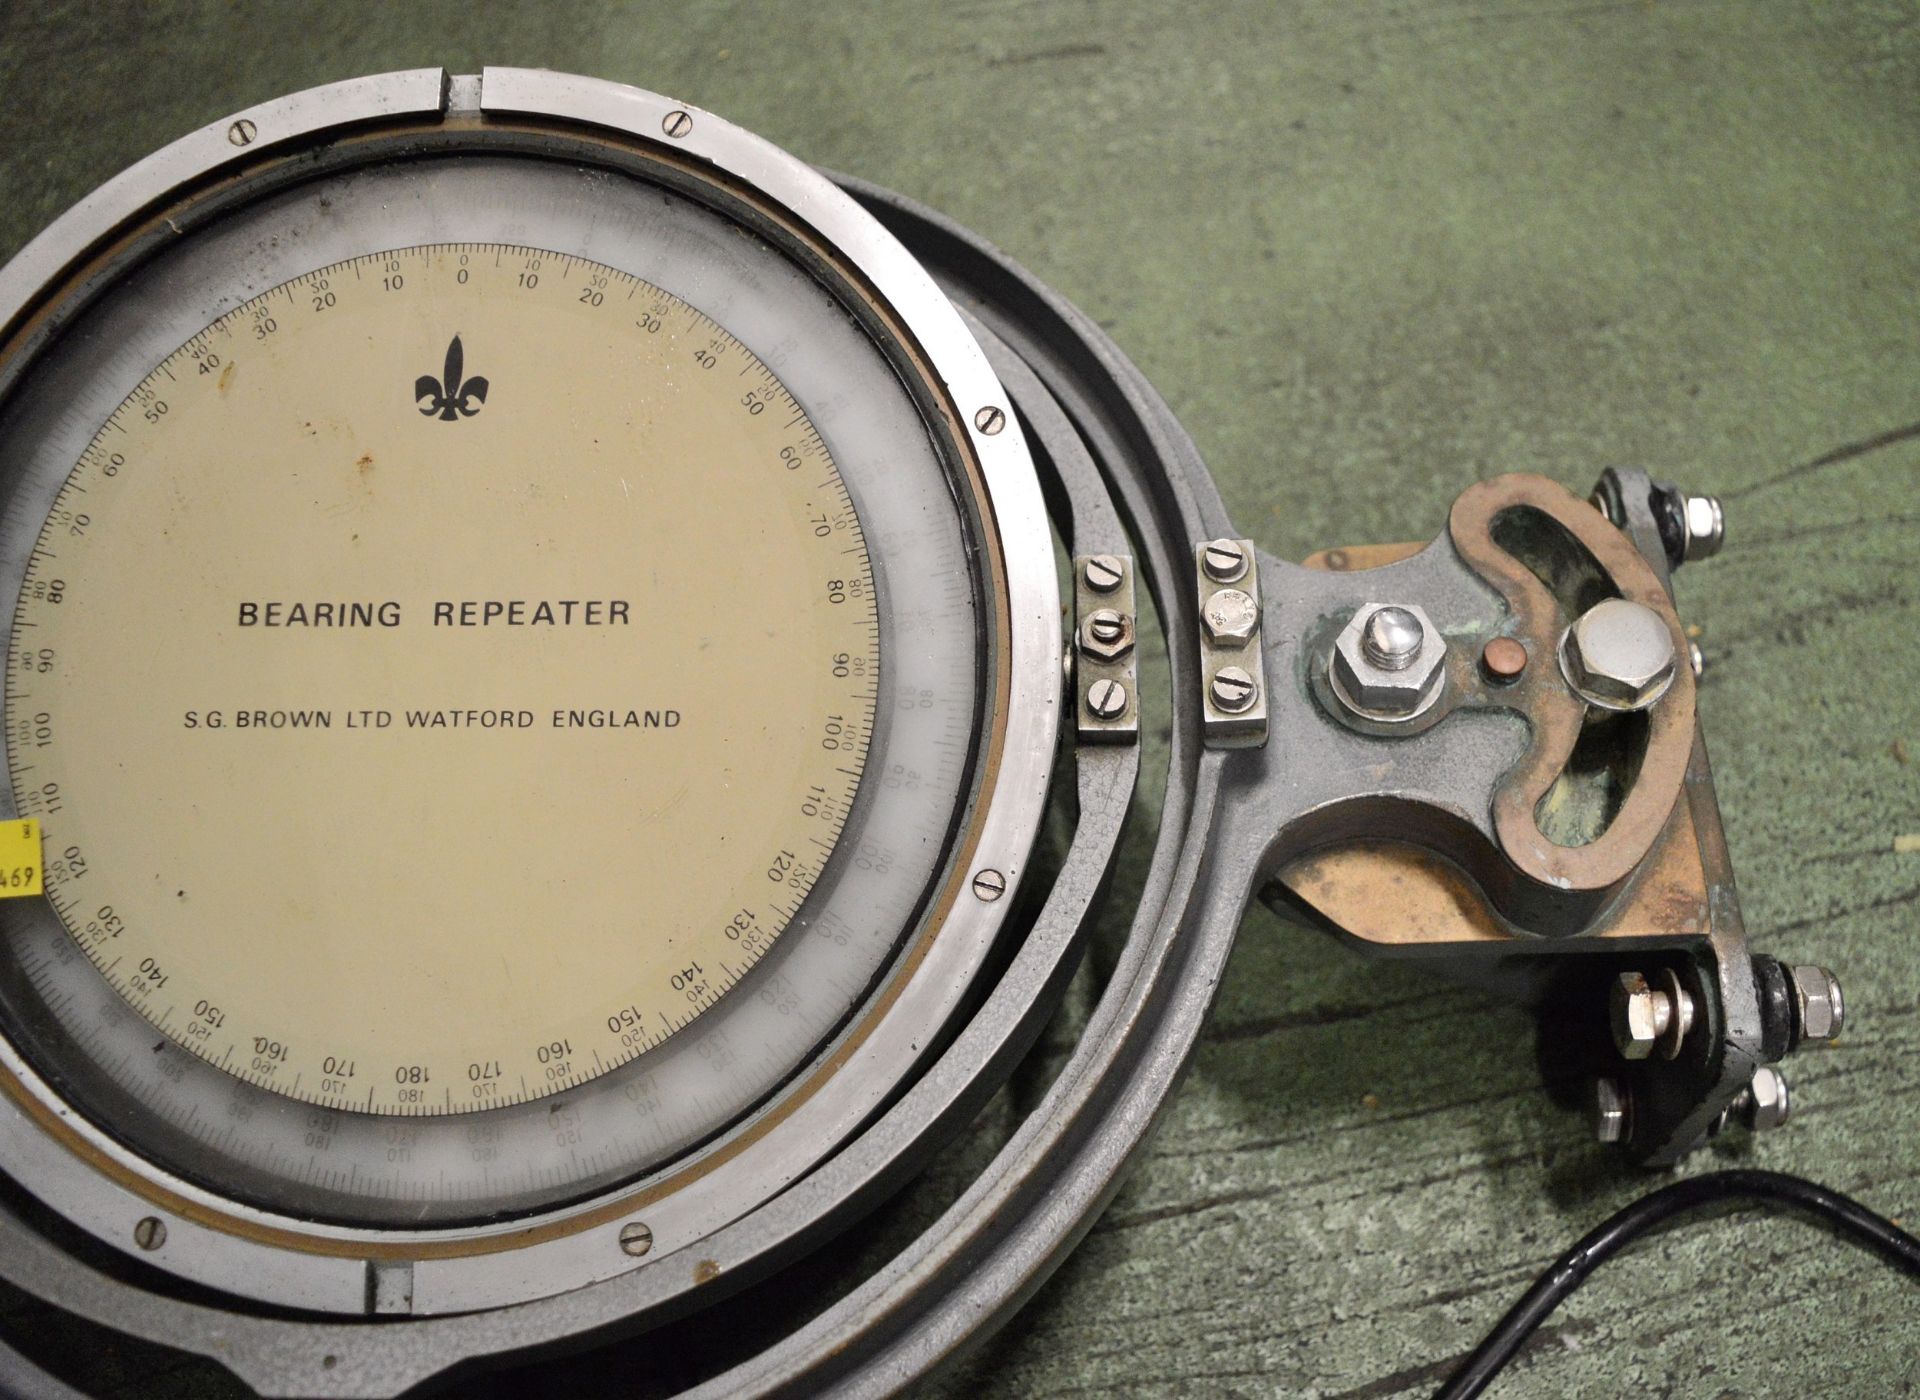 S.G.Brown Bearing Repeater Compass - Image 3 of 3